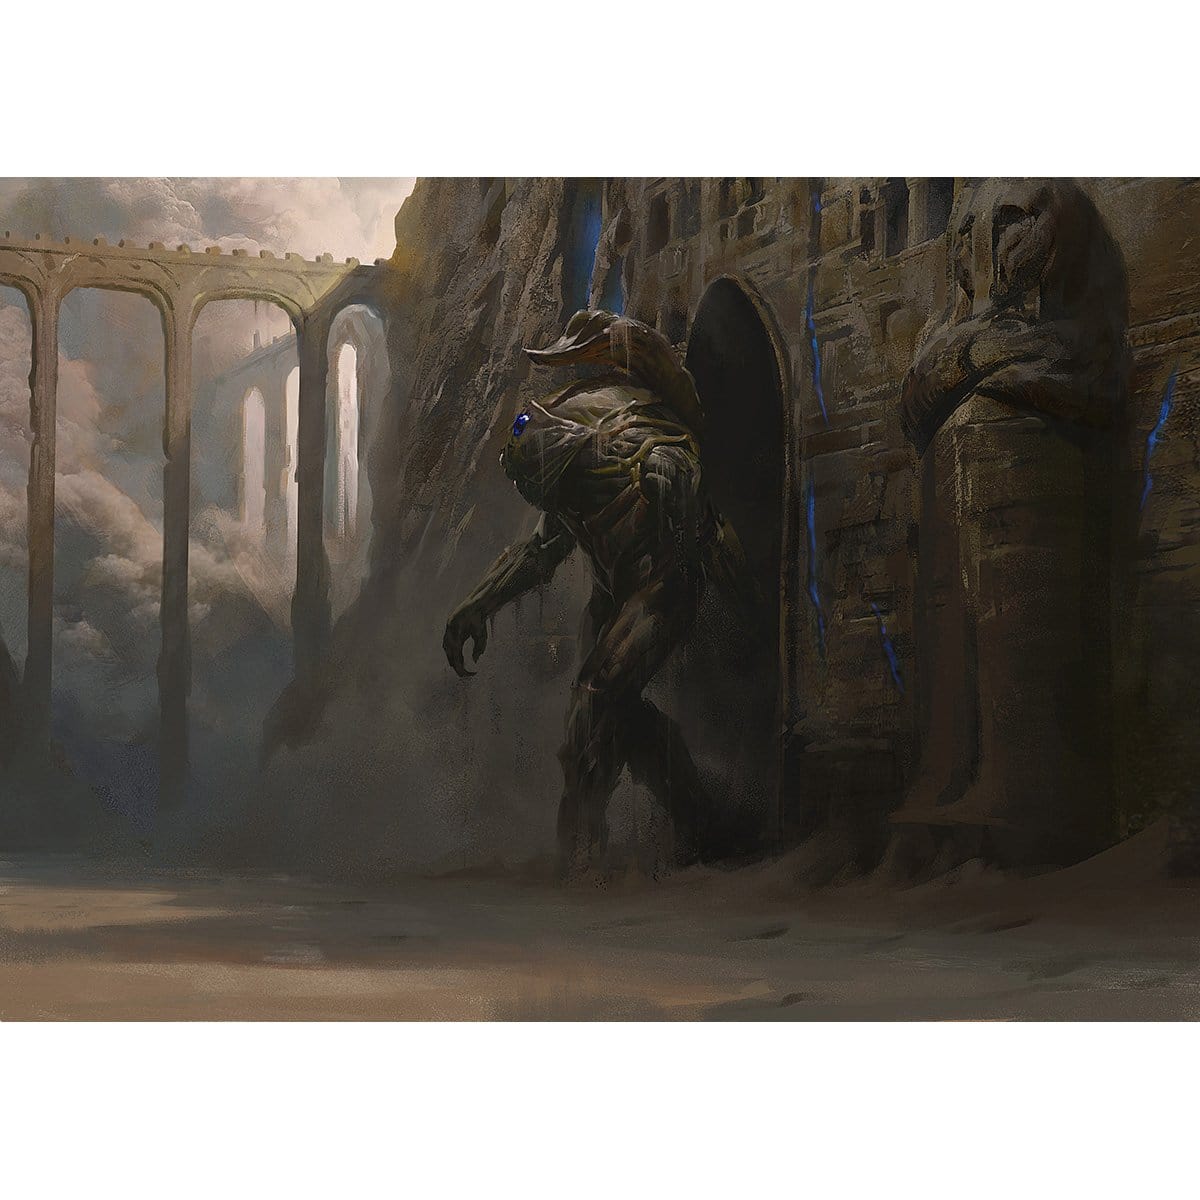 The Scorpion God Print - Print - Original Magic Art - Accessories for Magic the Gathering and other card games